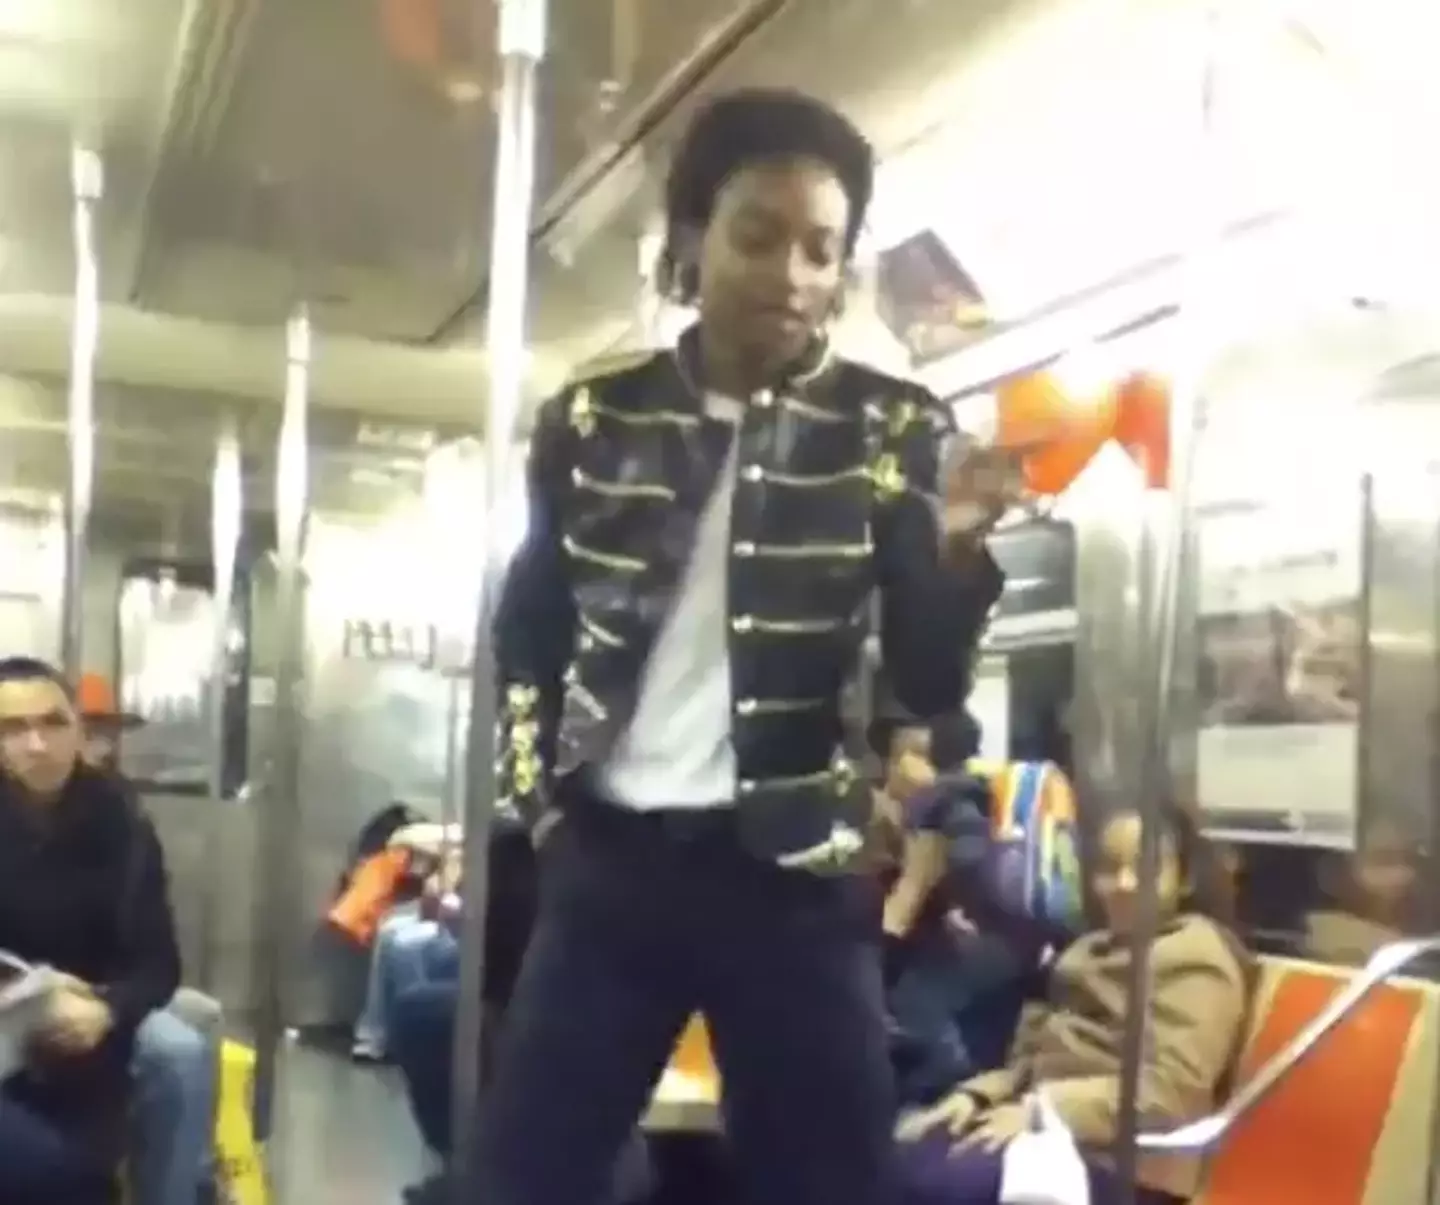 Jordan Neely was known to perform as Michael Jackson on subways